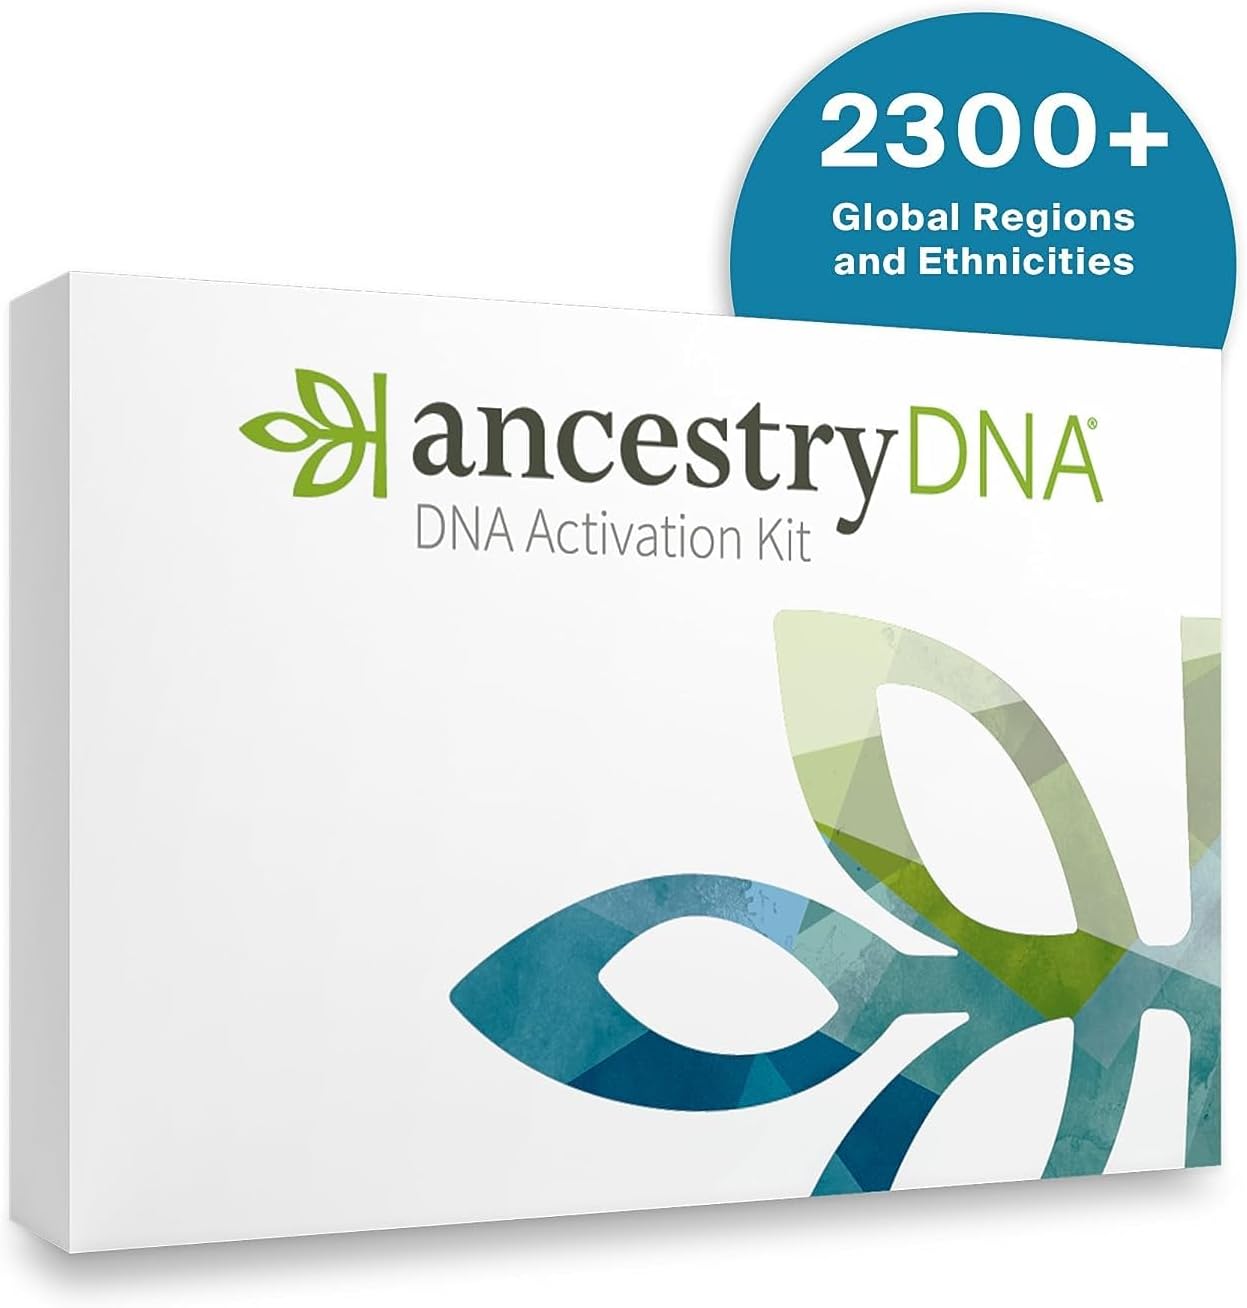 Get AncestryDNA Genetic Test Kit: Personalized Genetic Results, DNA Ethnicity Test, Origins & Ethnicities, Complete DNA Test, regularly $99.00 USD, now for just $49.00 USD!